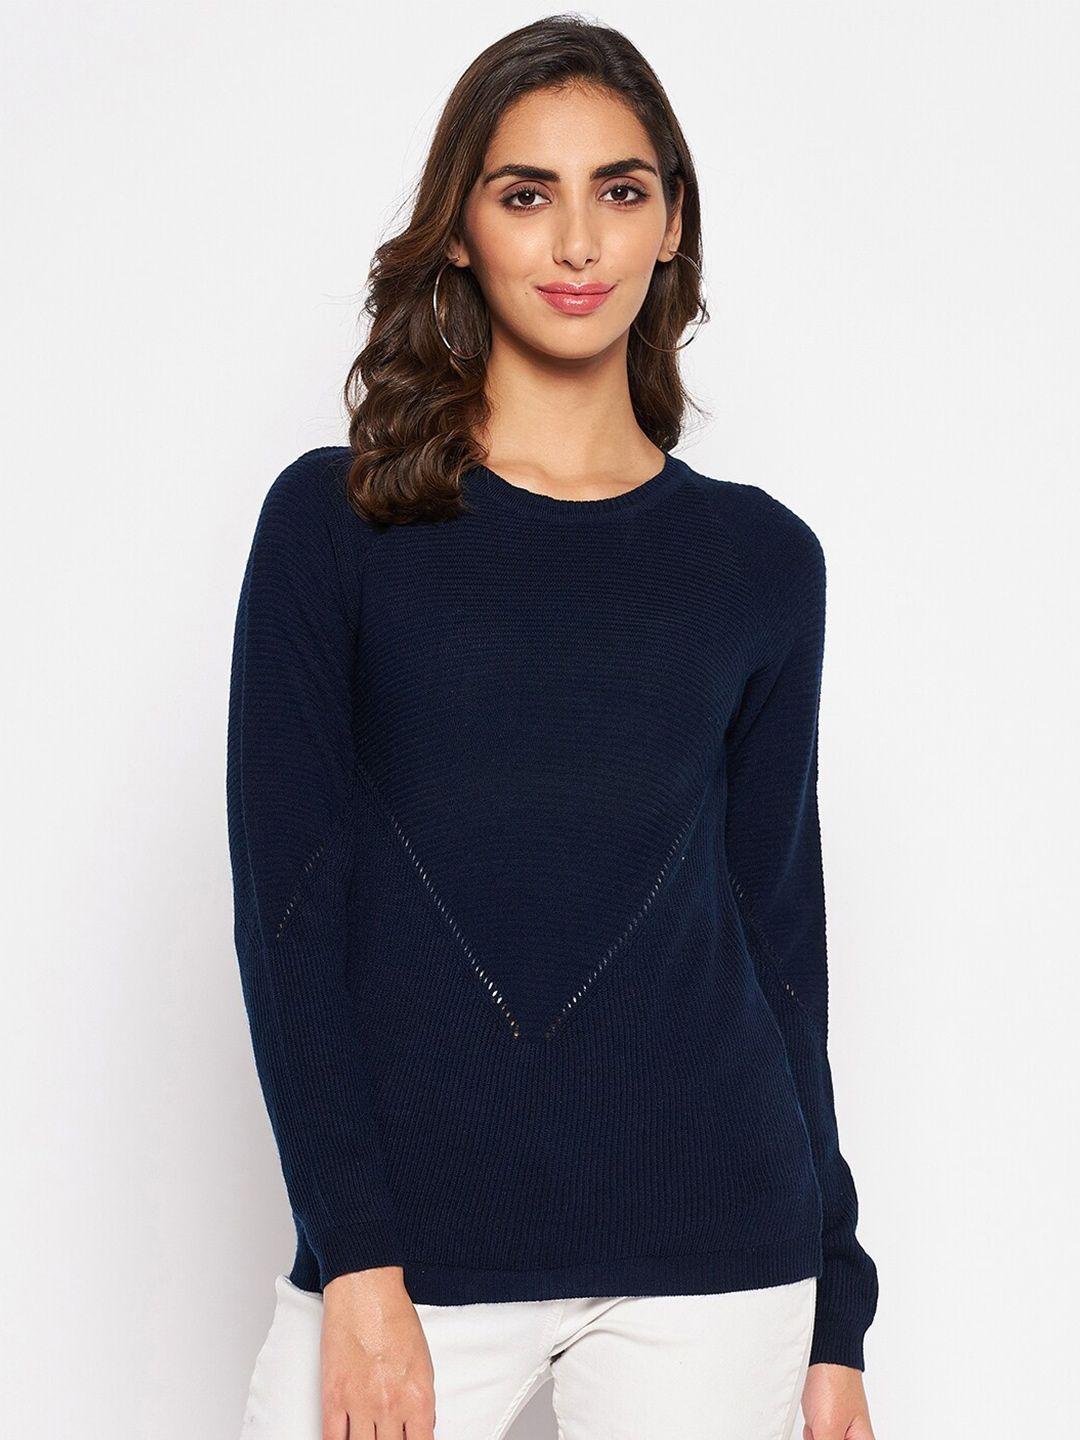 crozo by cantabil women navy blue & white ribbed acrylic pullover